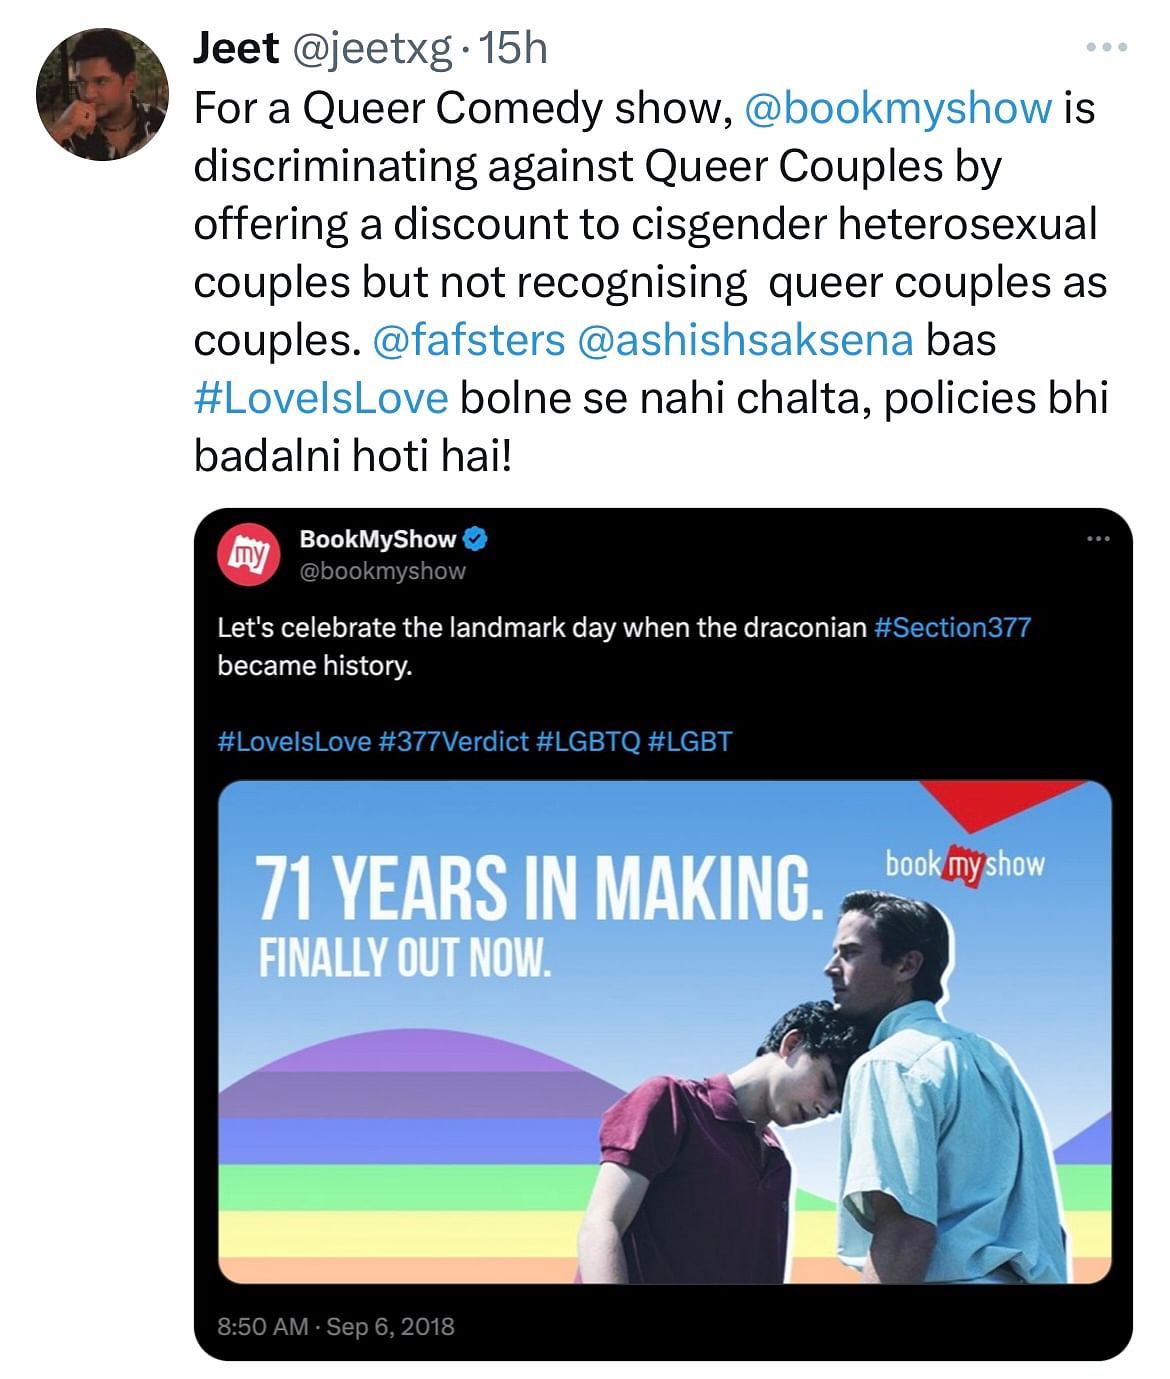 Comedian Navin Noronha, who is part of the queer comedy show, took to social media to express their frustration.